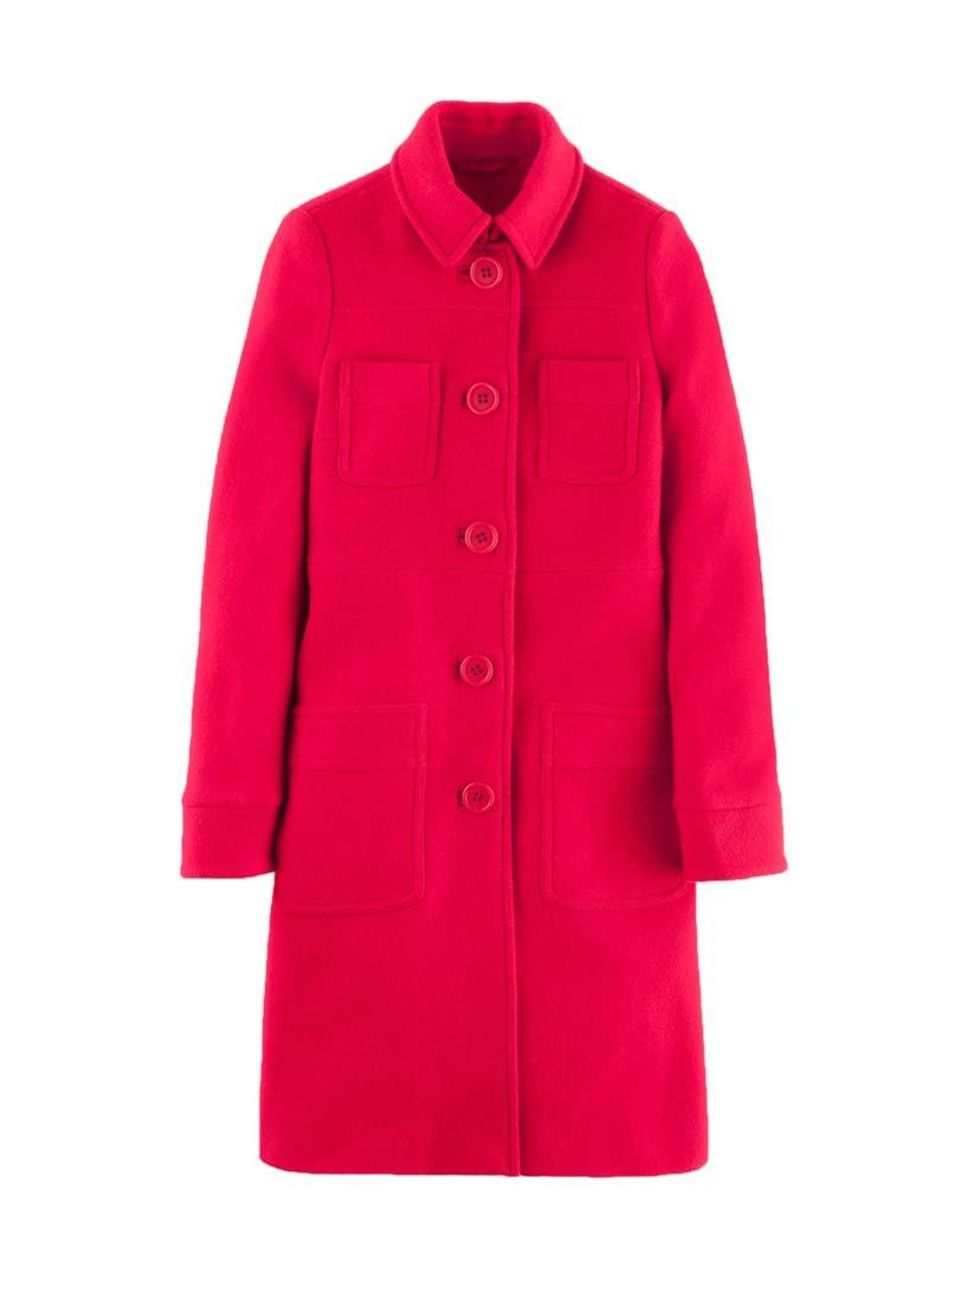 <p>A black winter coat wouln&#39;t do forDigital Director Phebe Hunnicutt.</p>

<p>&nbsp;</p>

<p><a href="http://www.boden.co.uk/en-GB/Womens-Coats-Jackets/WE461-RED/Womens-New-Red-Sophie-Coat.html" target="_blank">Boden</a> coat, &pound;189</p>